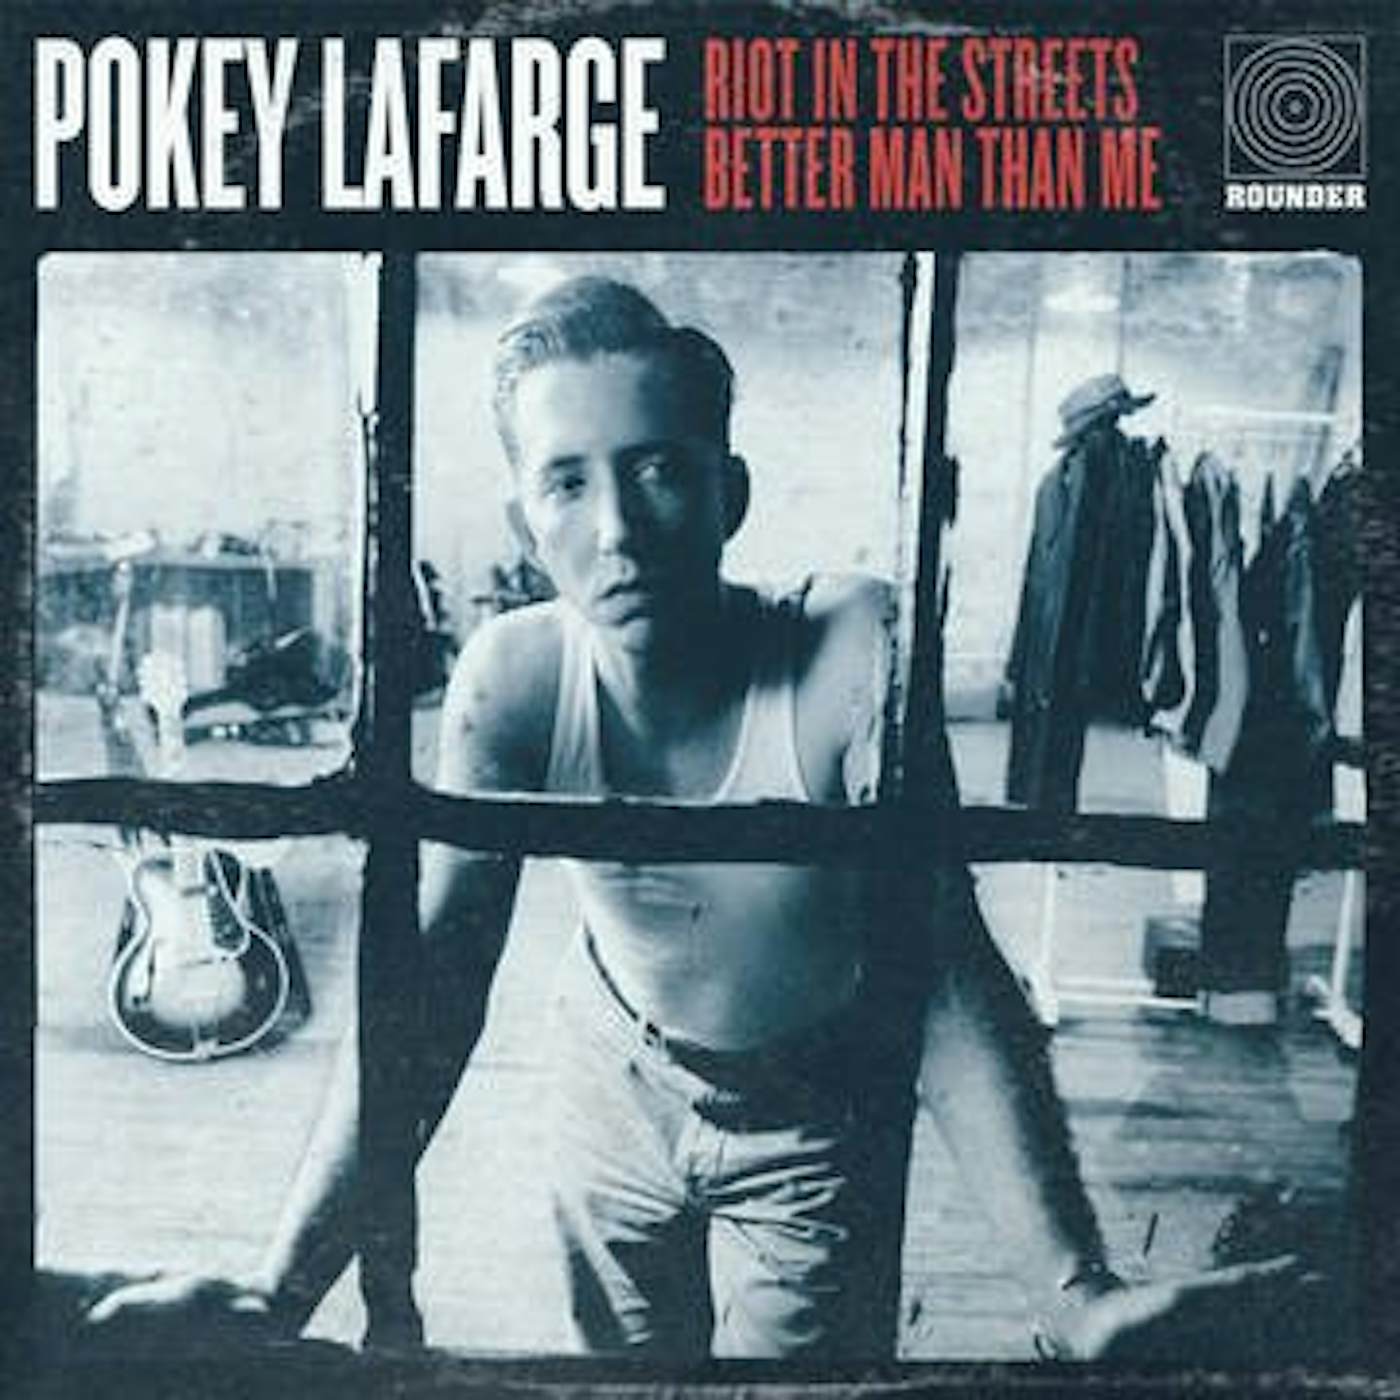 Pokey LaFarge RIOT IN THE STREETS / BETTER MAN THAN ME Vinyl Record